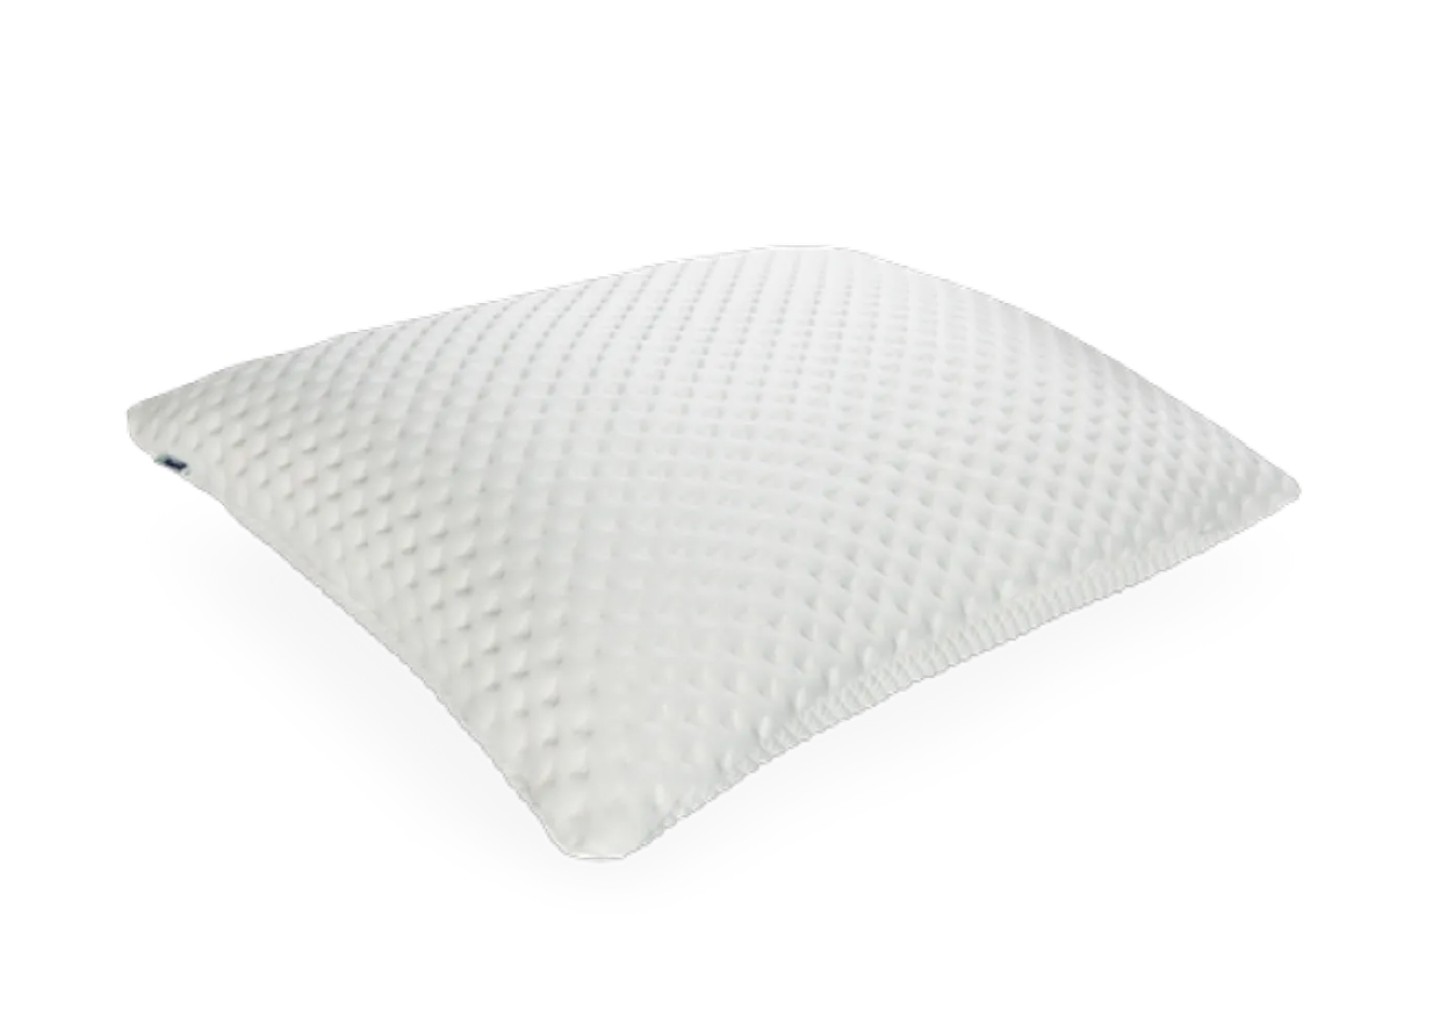 THE COMFORT CLOUD PILLOW by Tempur